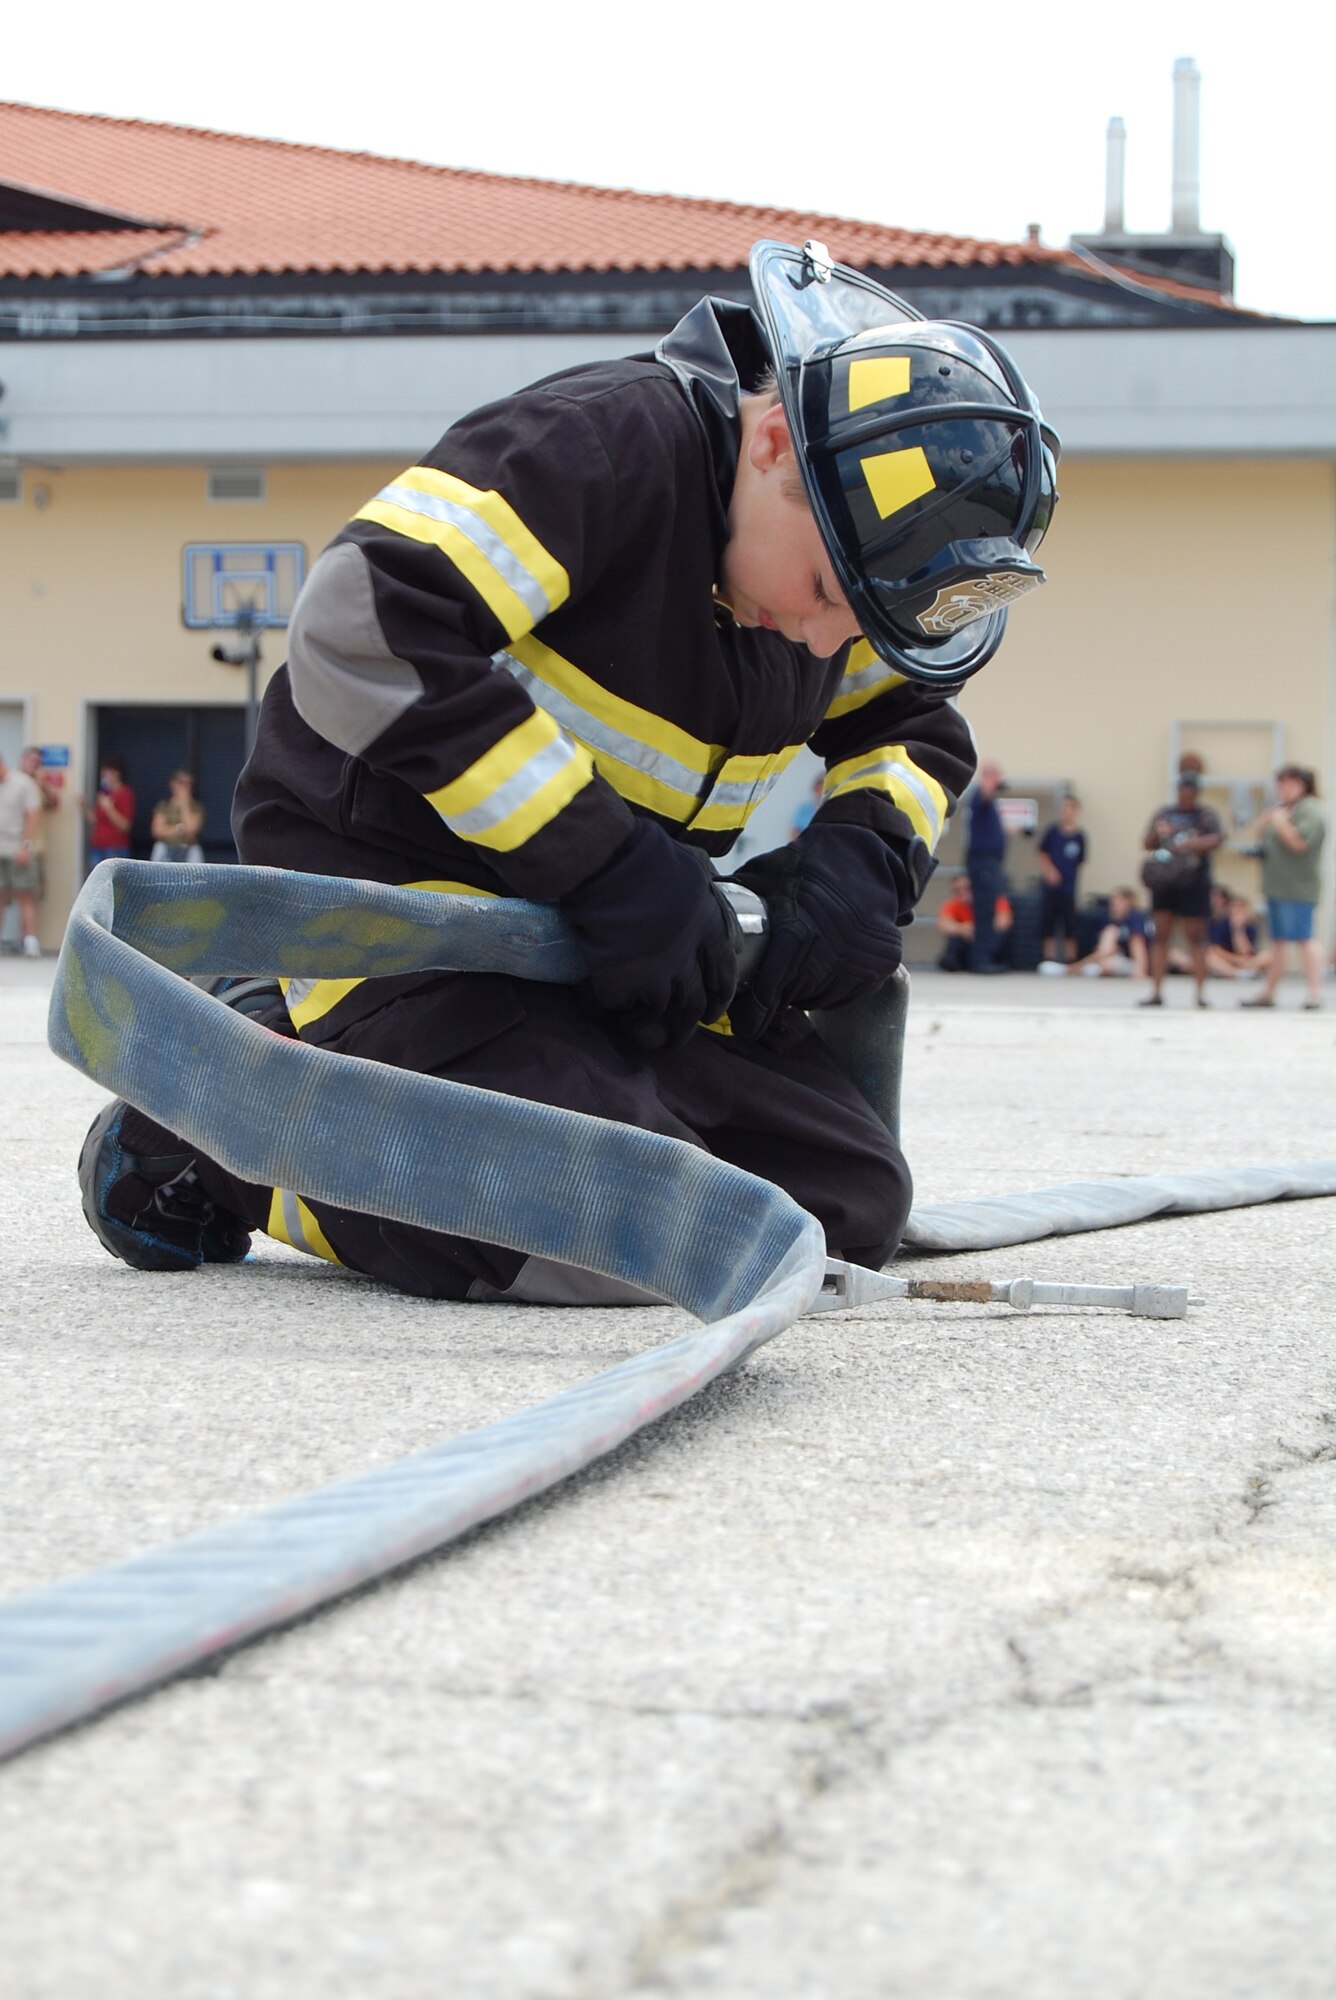 Red Team member Cody Gummerson hooks up a fire hose as part of the Aviano Fire Camp relay competition July 3, 2009 at the base fire station. The week-long camp, which was open to 10-13-year-old children, taught attendees basic firefighter knowledge and skills. (U.S. Air Force photo/Staff Sgt. Lindsey Maurice)